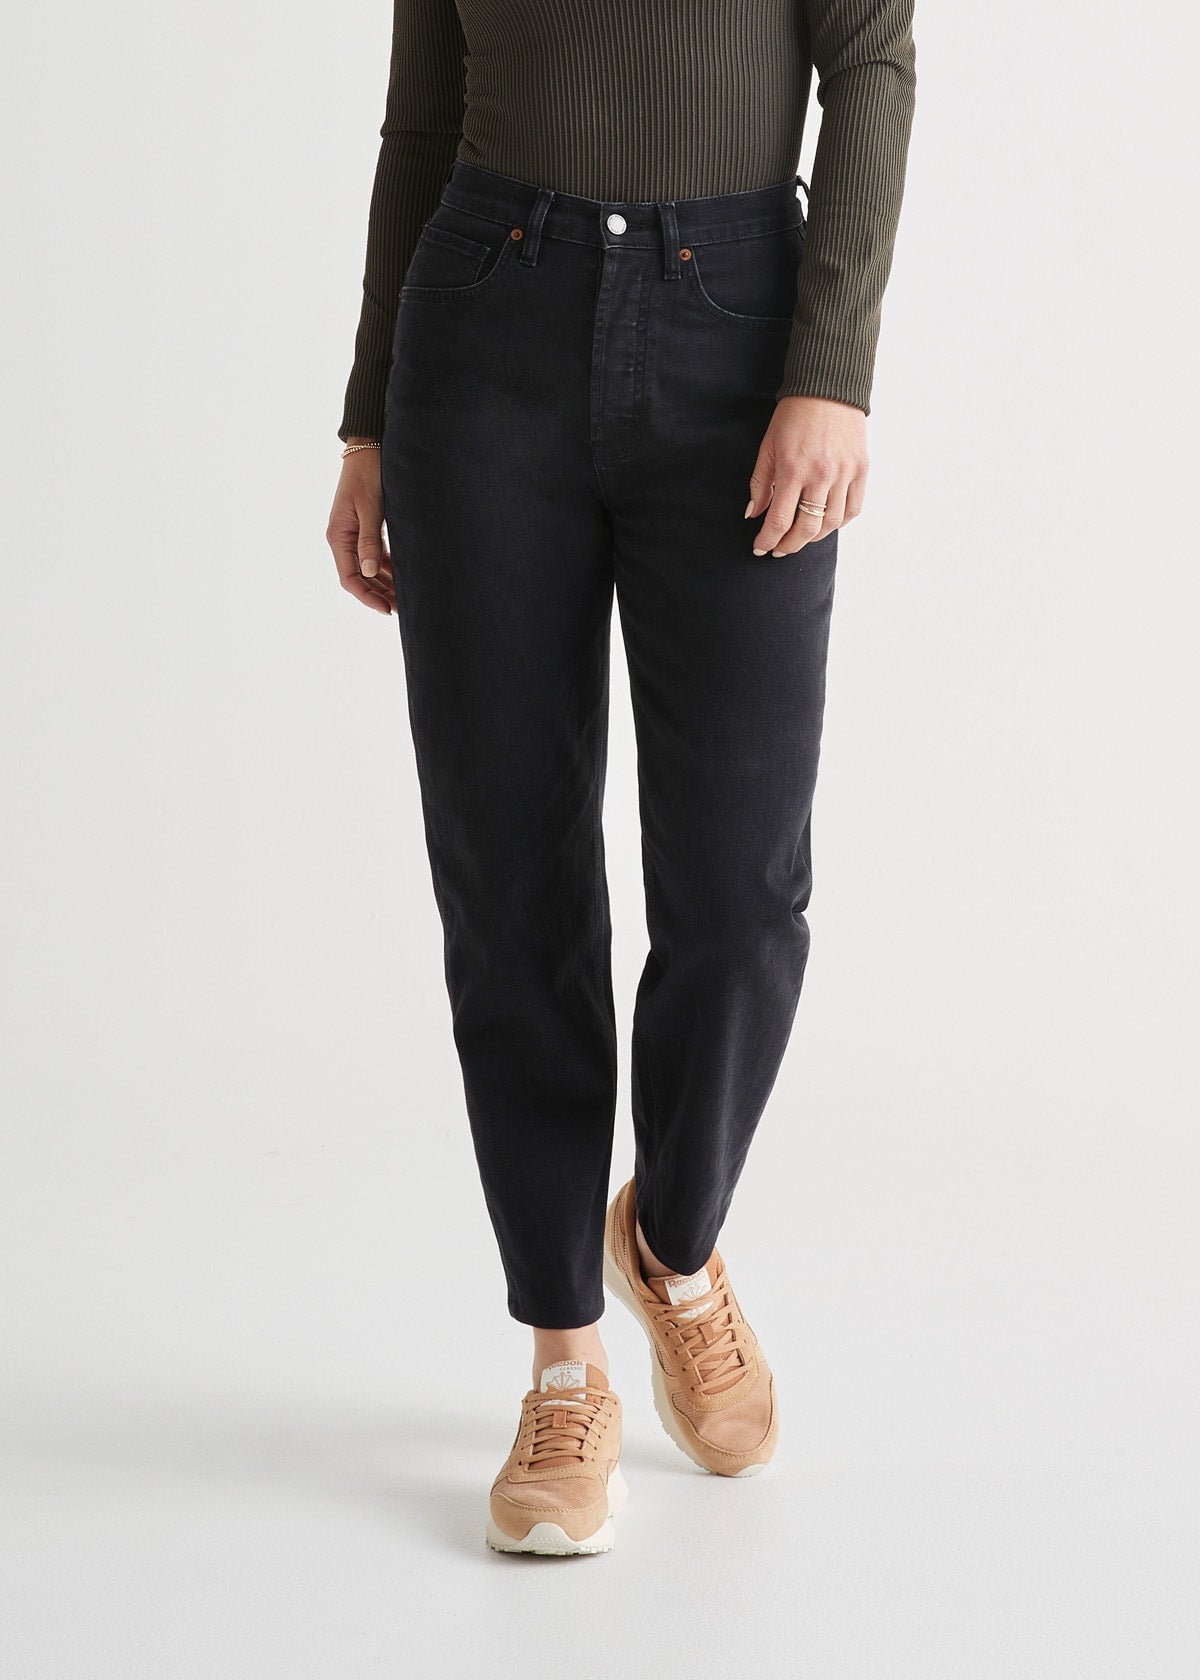 Midweight Denim High Rise Arc (Button Fly) - Aged Black